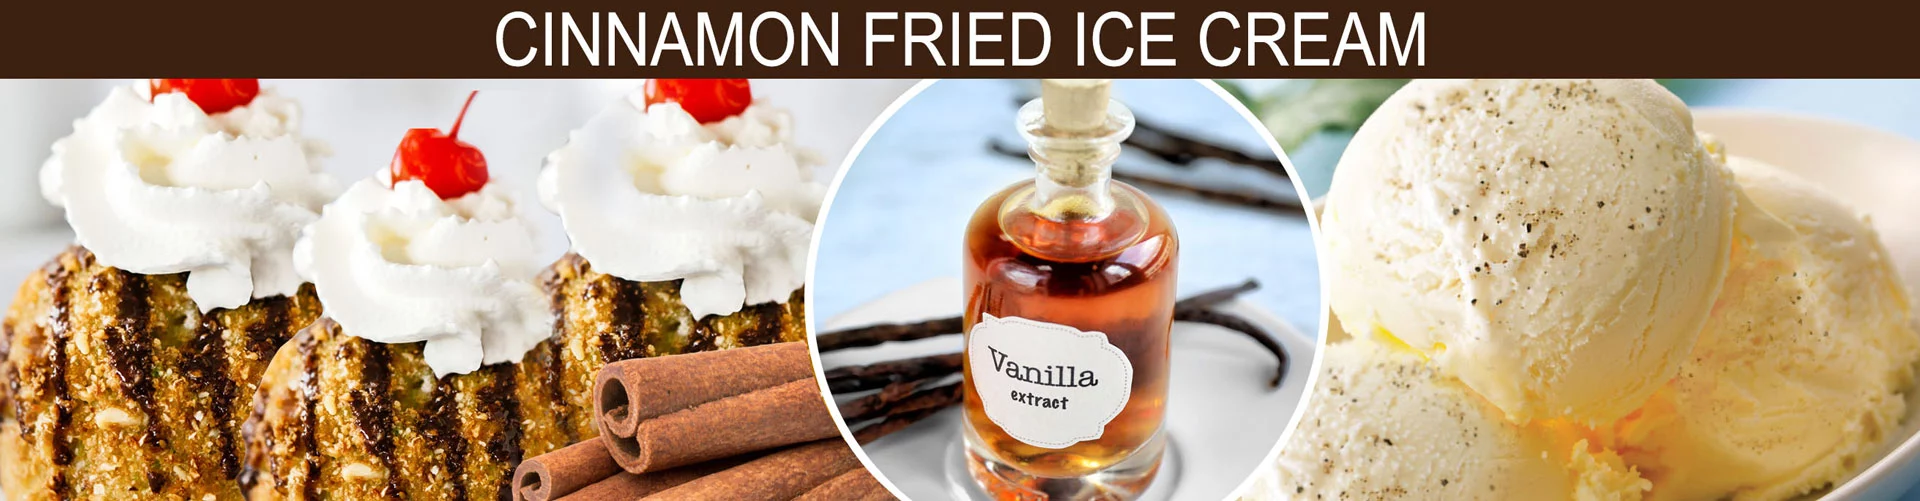 Banner image of a tempting fragrance that will fill your home with the warm smells of vanilla and cinnamon.